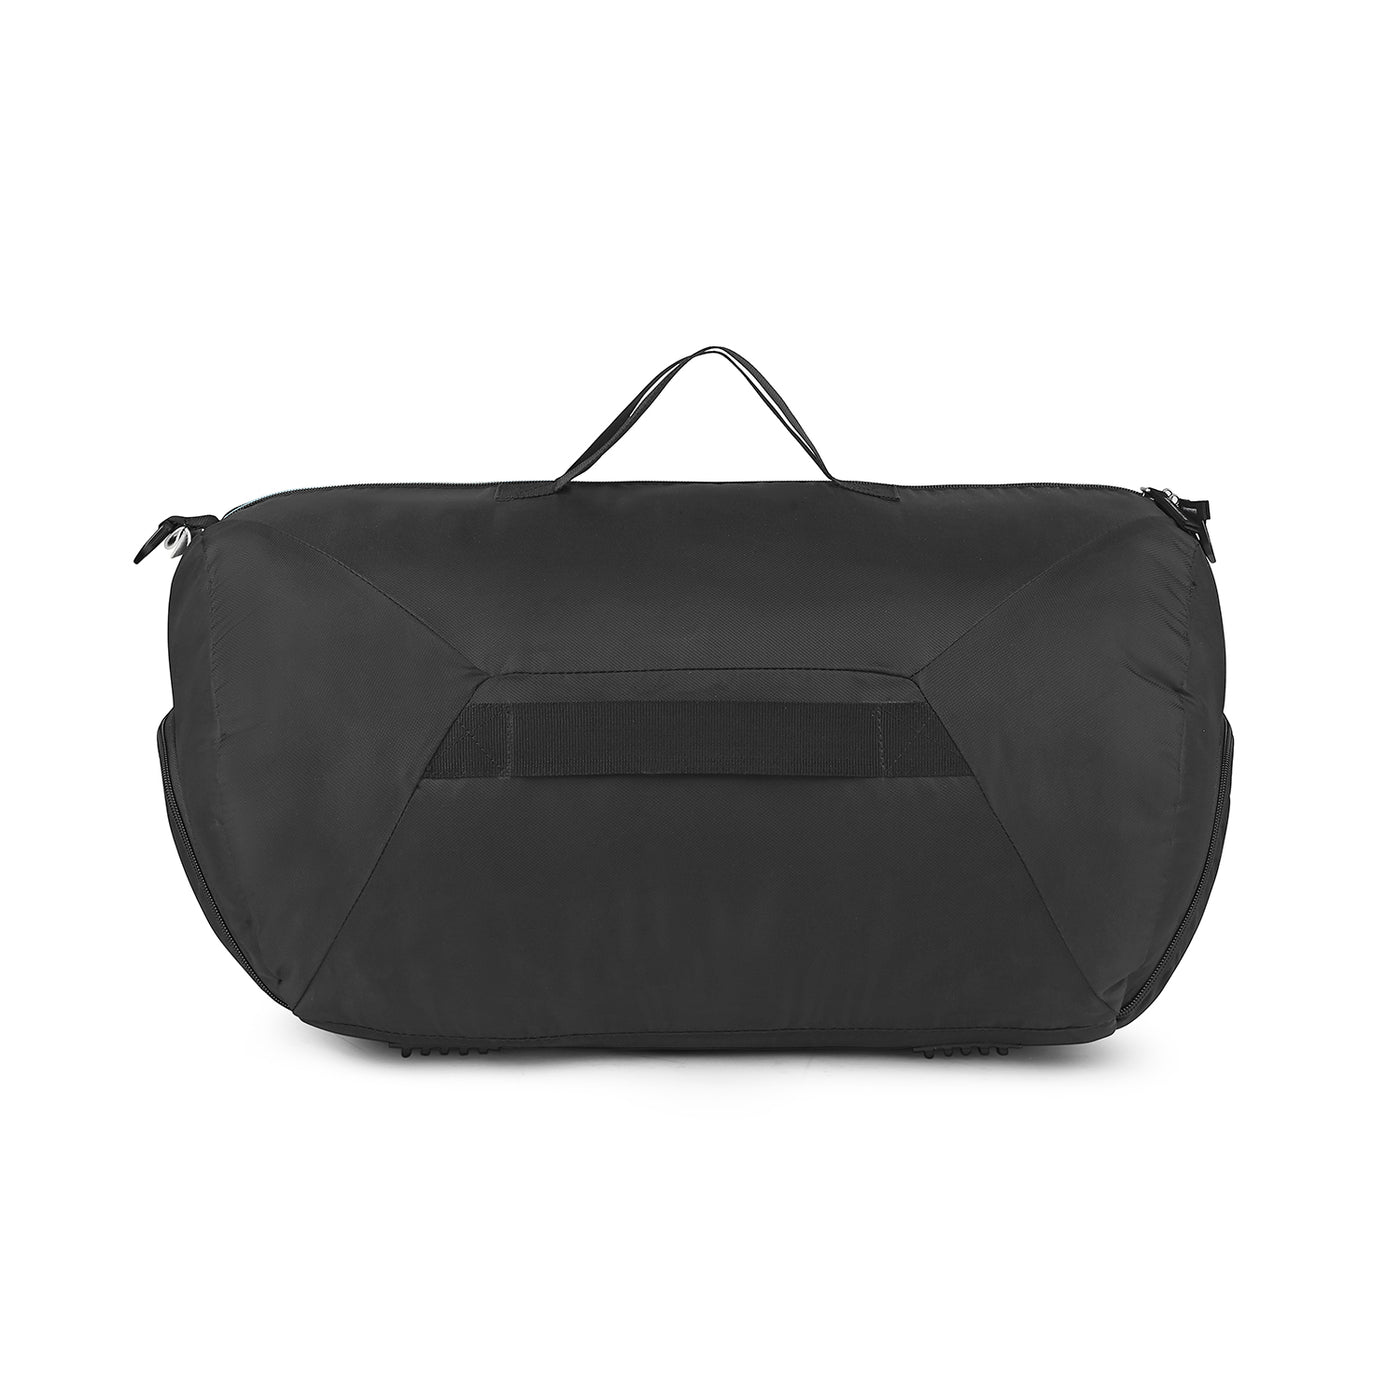 Skybags Endeavr Duffle 52